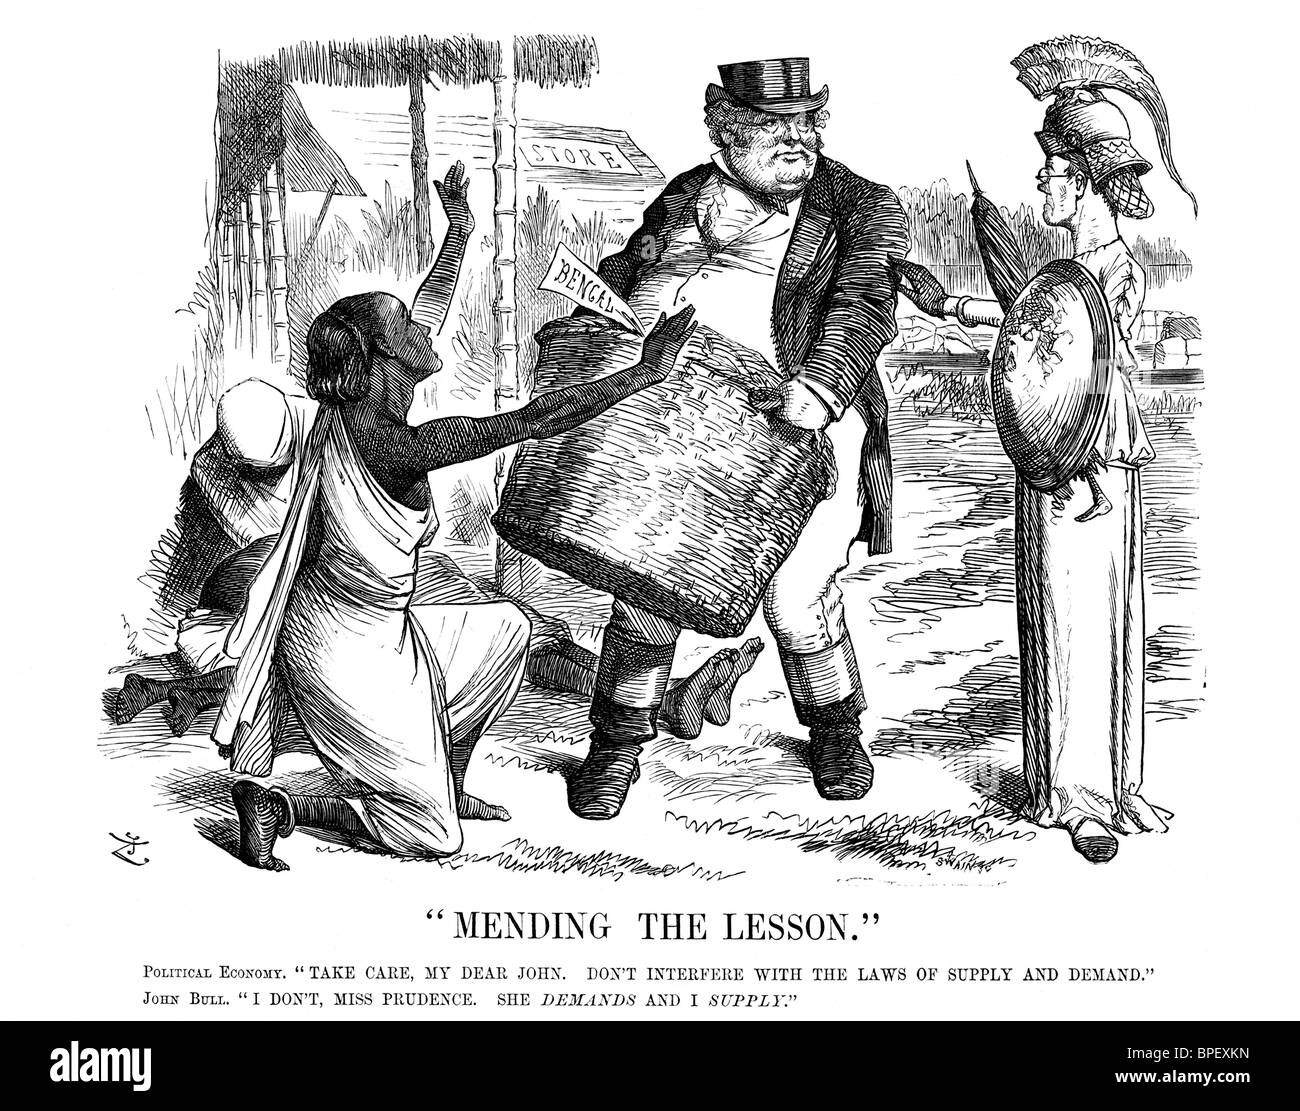 Punch, a British weekly magazine with humor and satire, included this political cartoon in December  20, 1873, about economy . Stock Photo